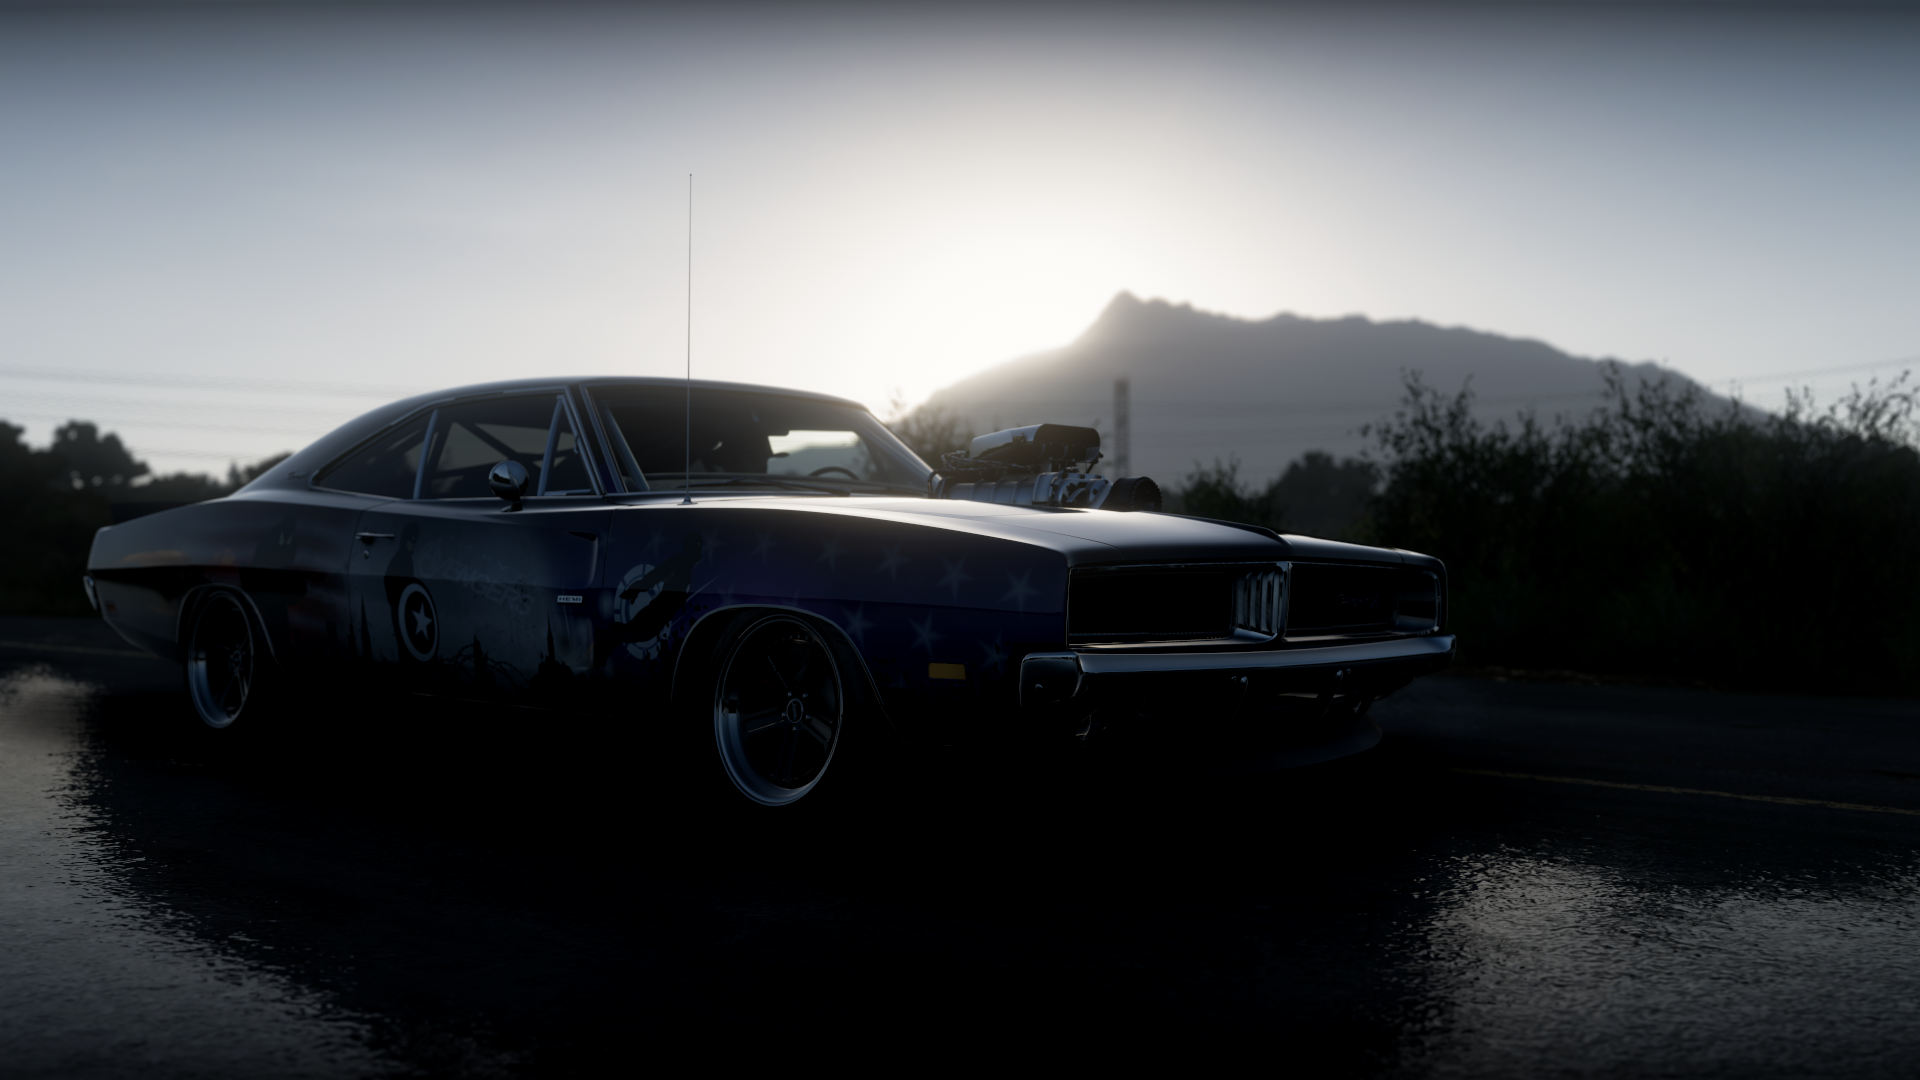 Forza Horizon 5 Video Games Dodge Charger Dodge American Cars PlaygroundGames Supercharger Vehicle S 1920x1080